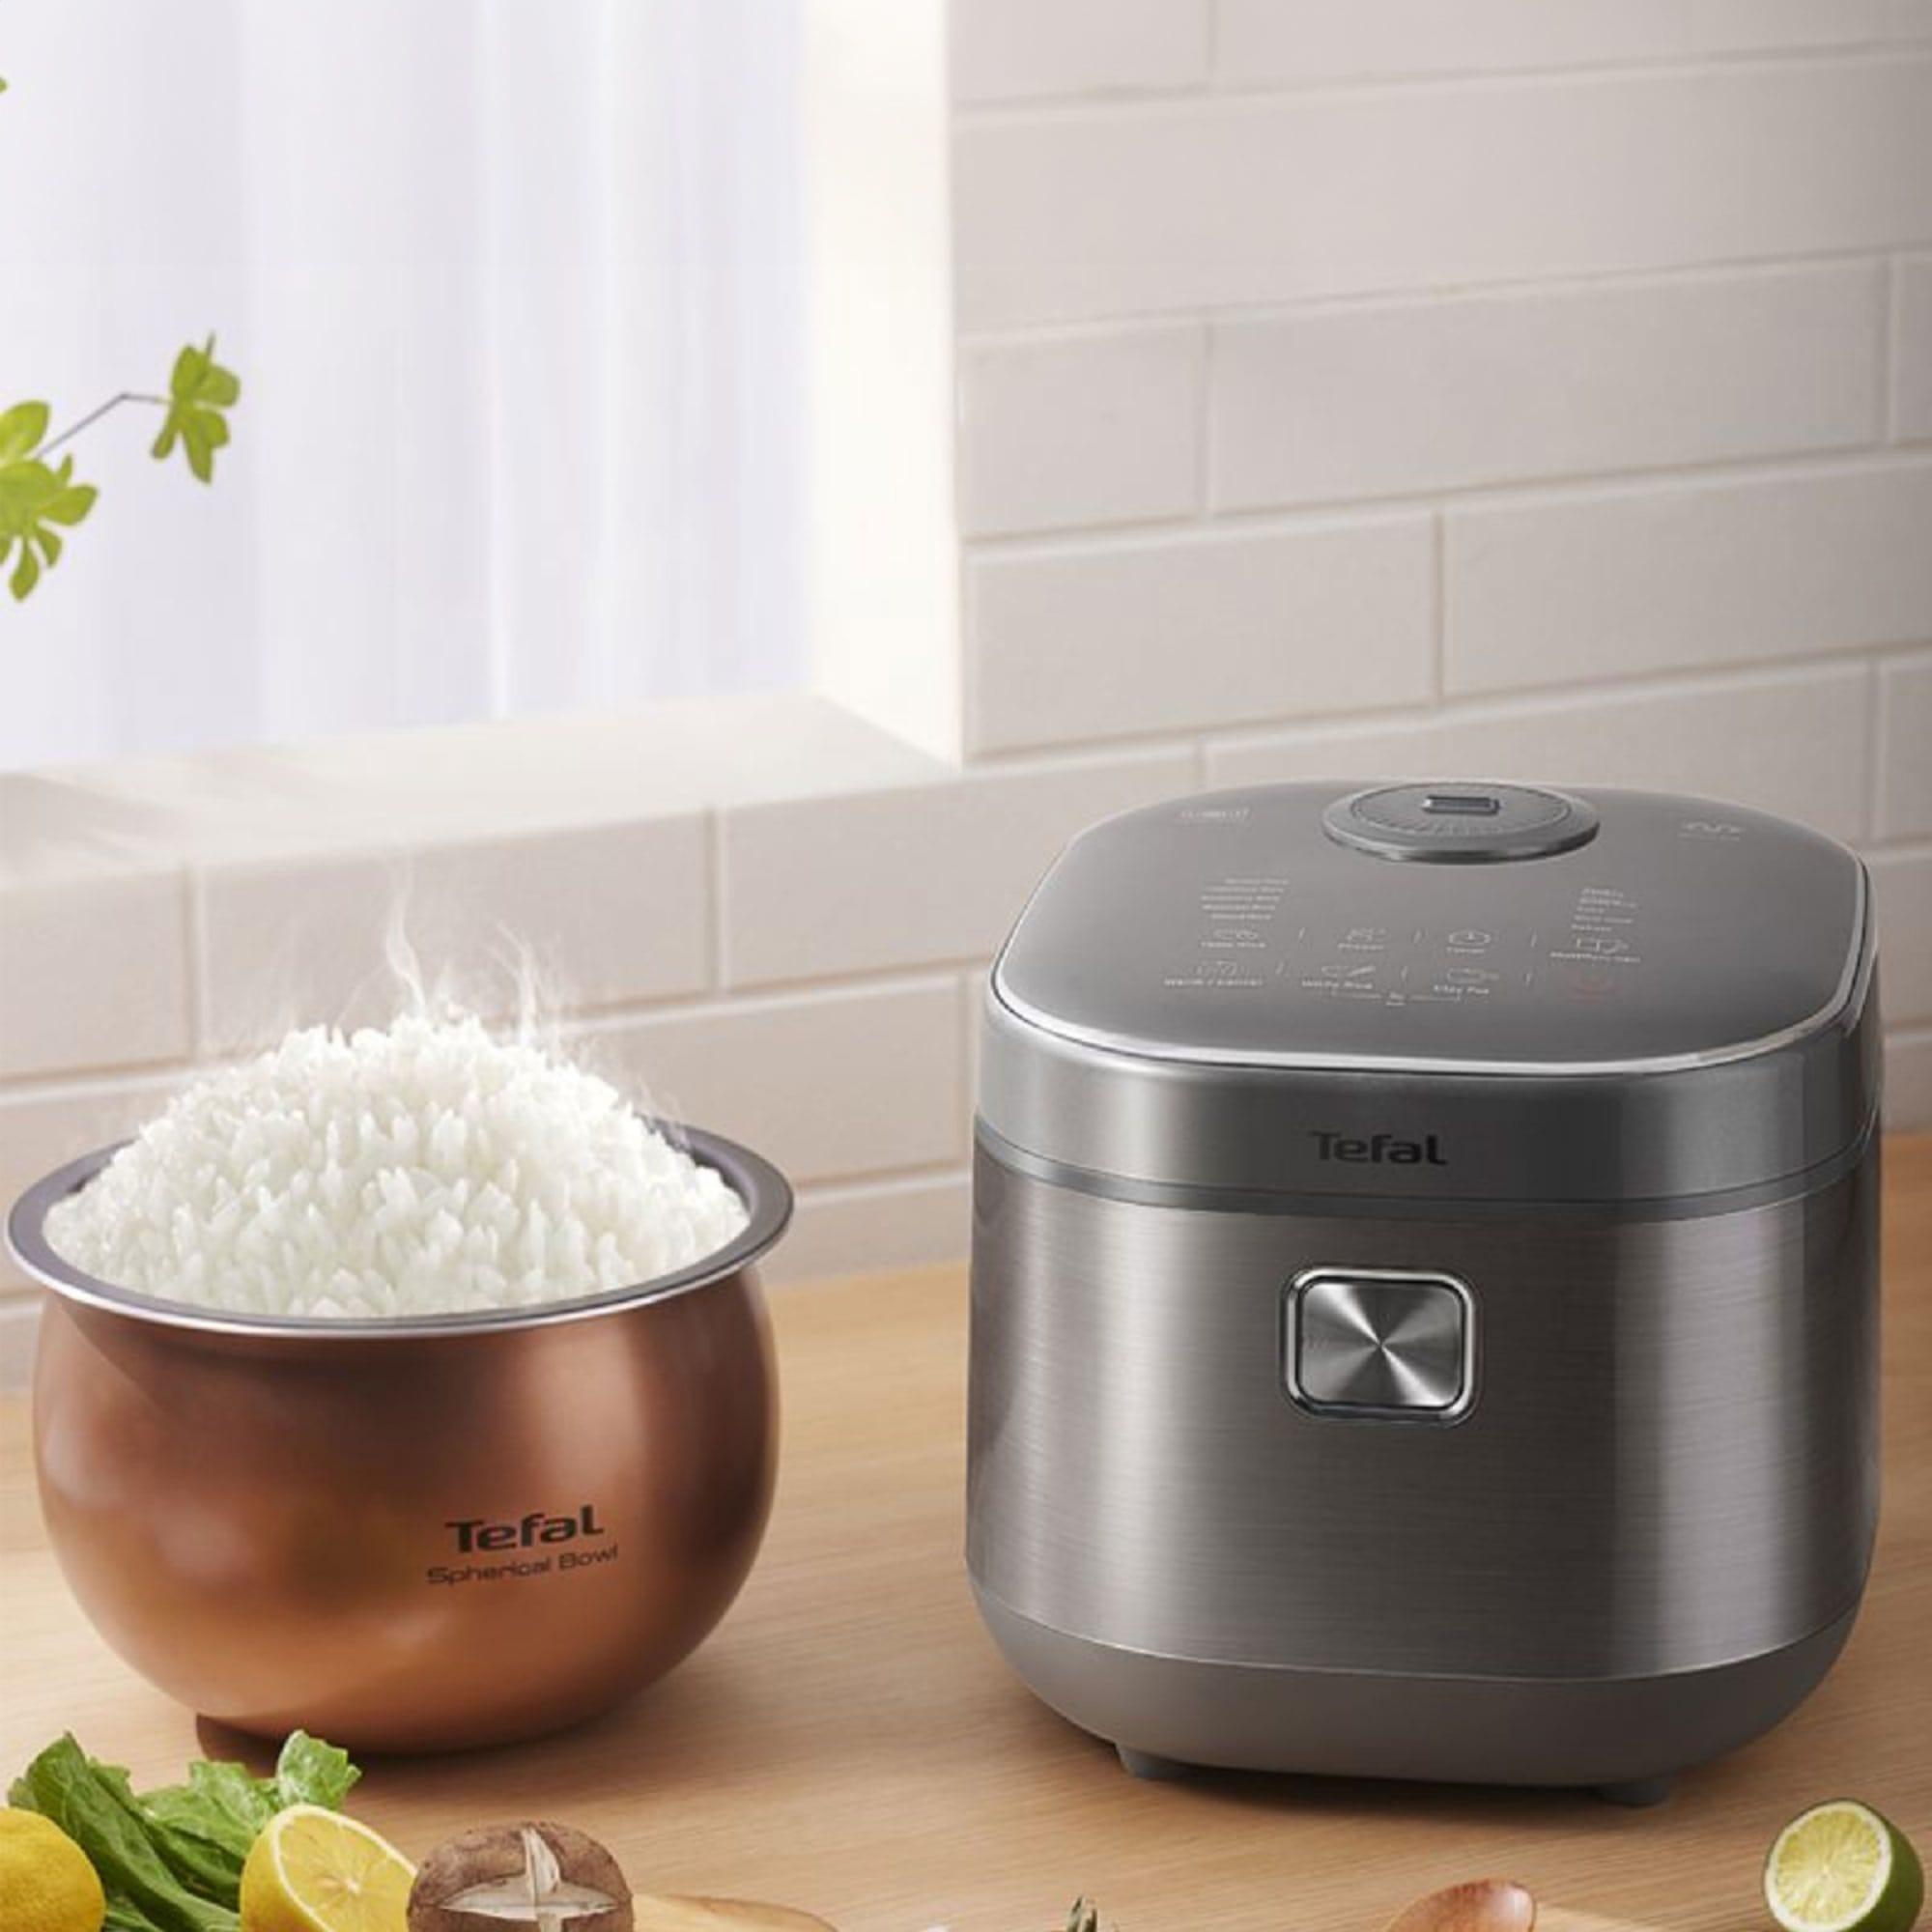 Tefal RK818 Induction Rice Master and Slow Cooker 1.8L Image 3